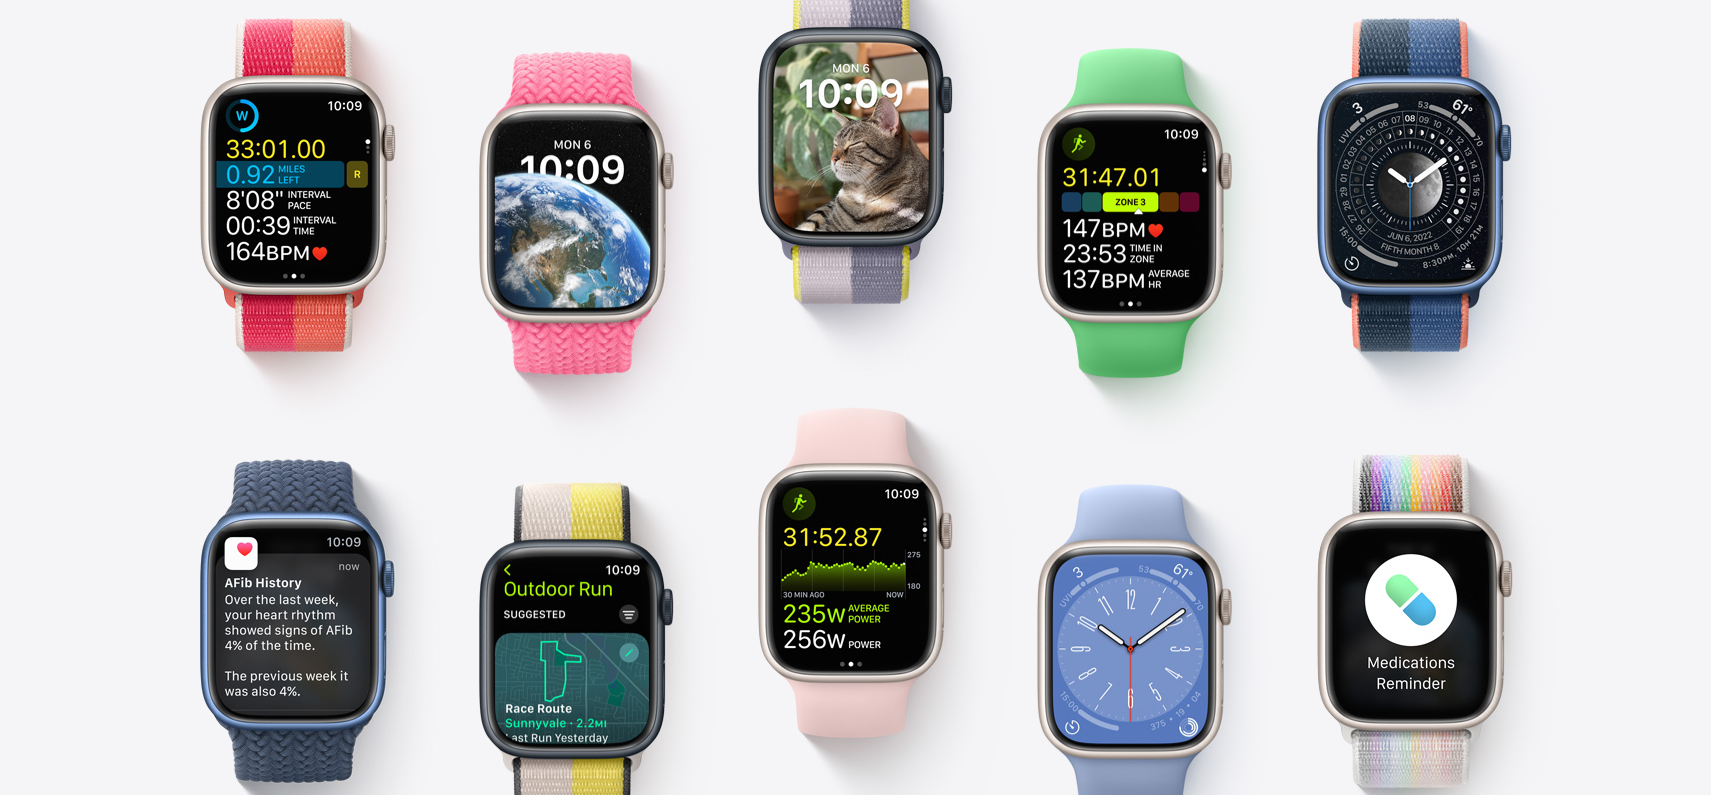 Apple Watch faces